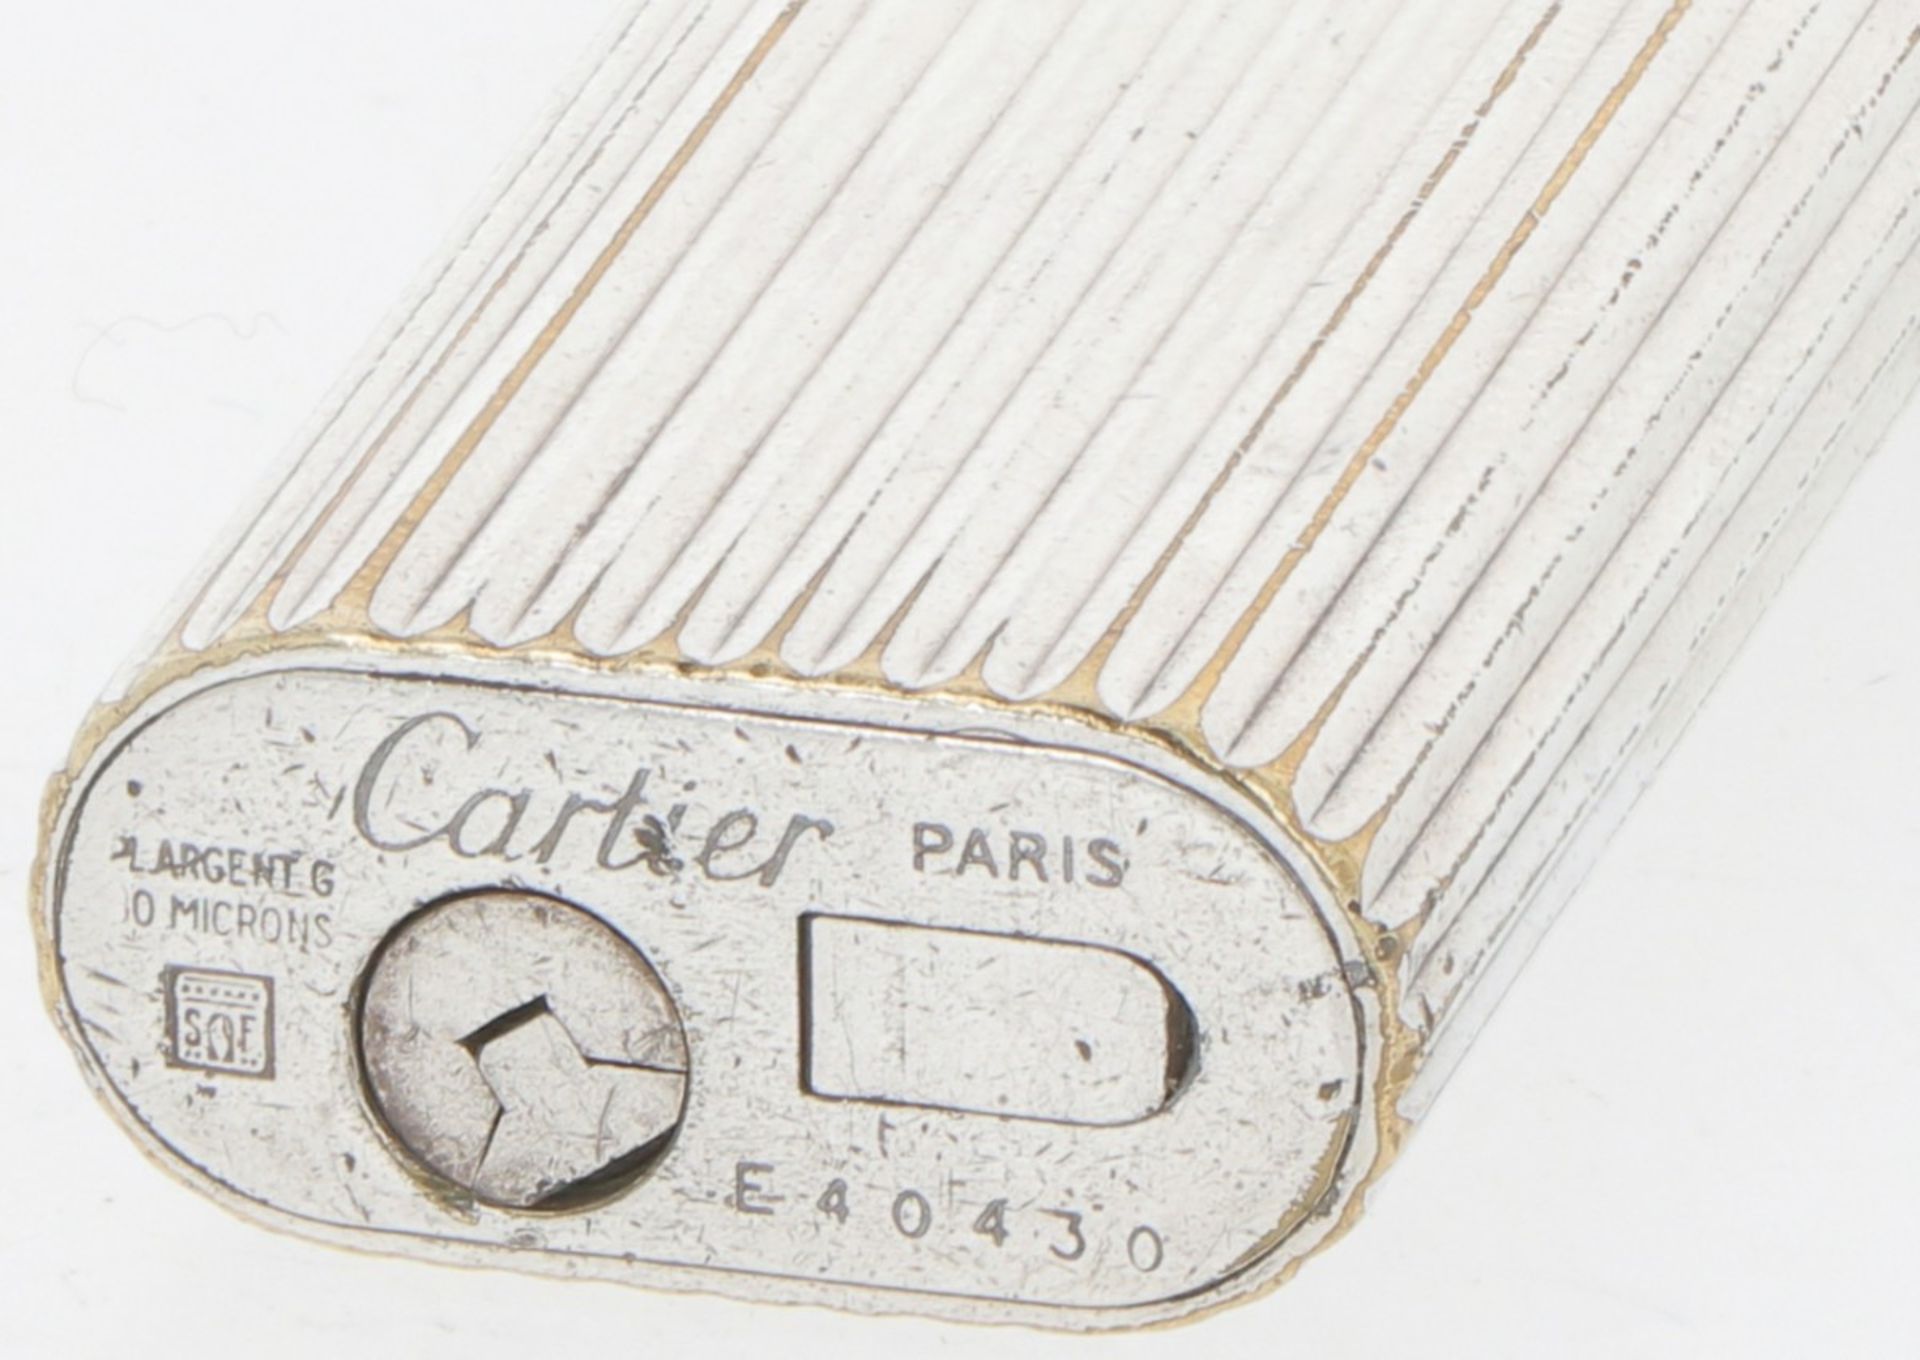 Cartier lighter silver-plated. - Image 3 of 3